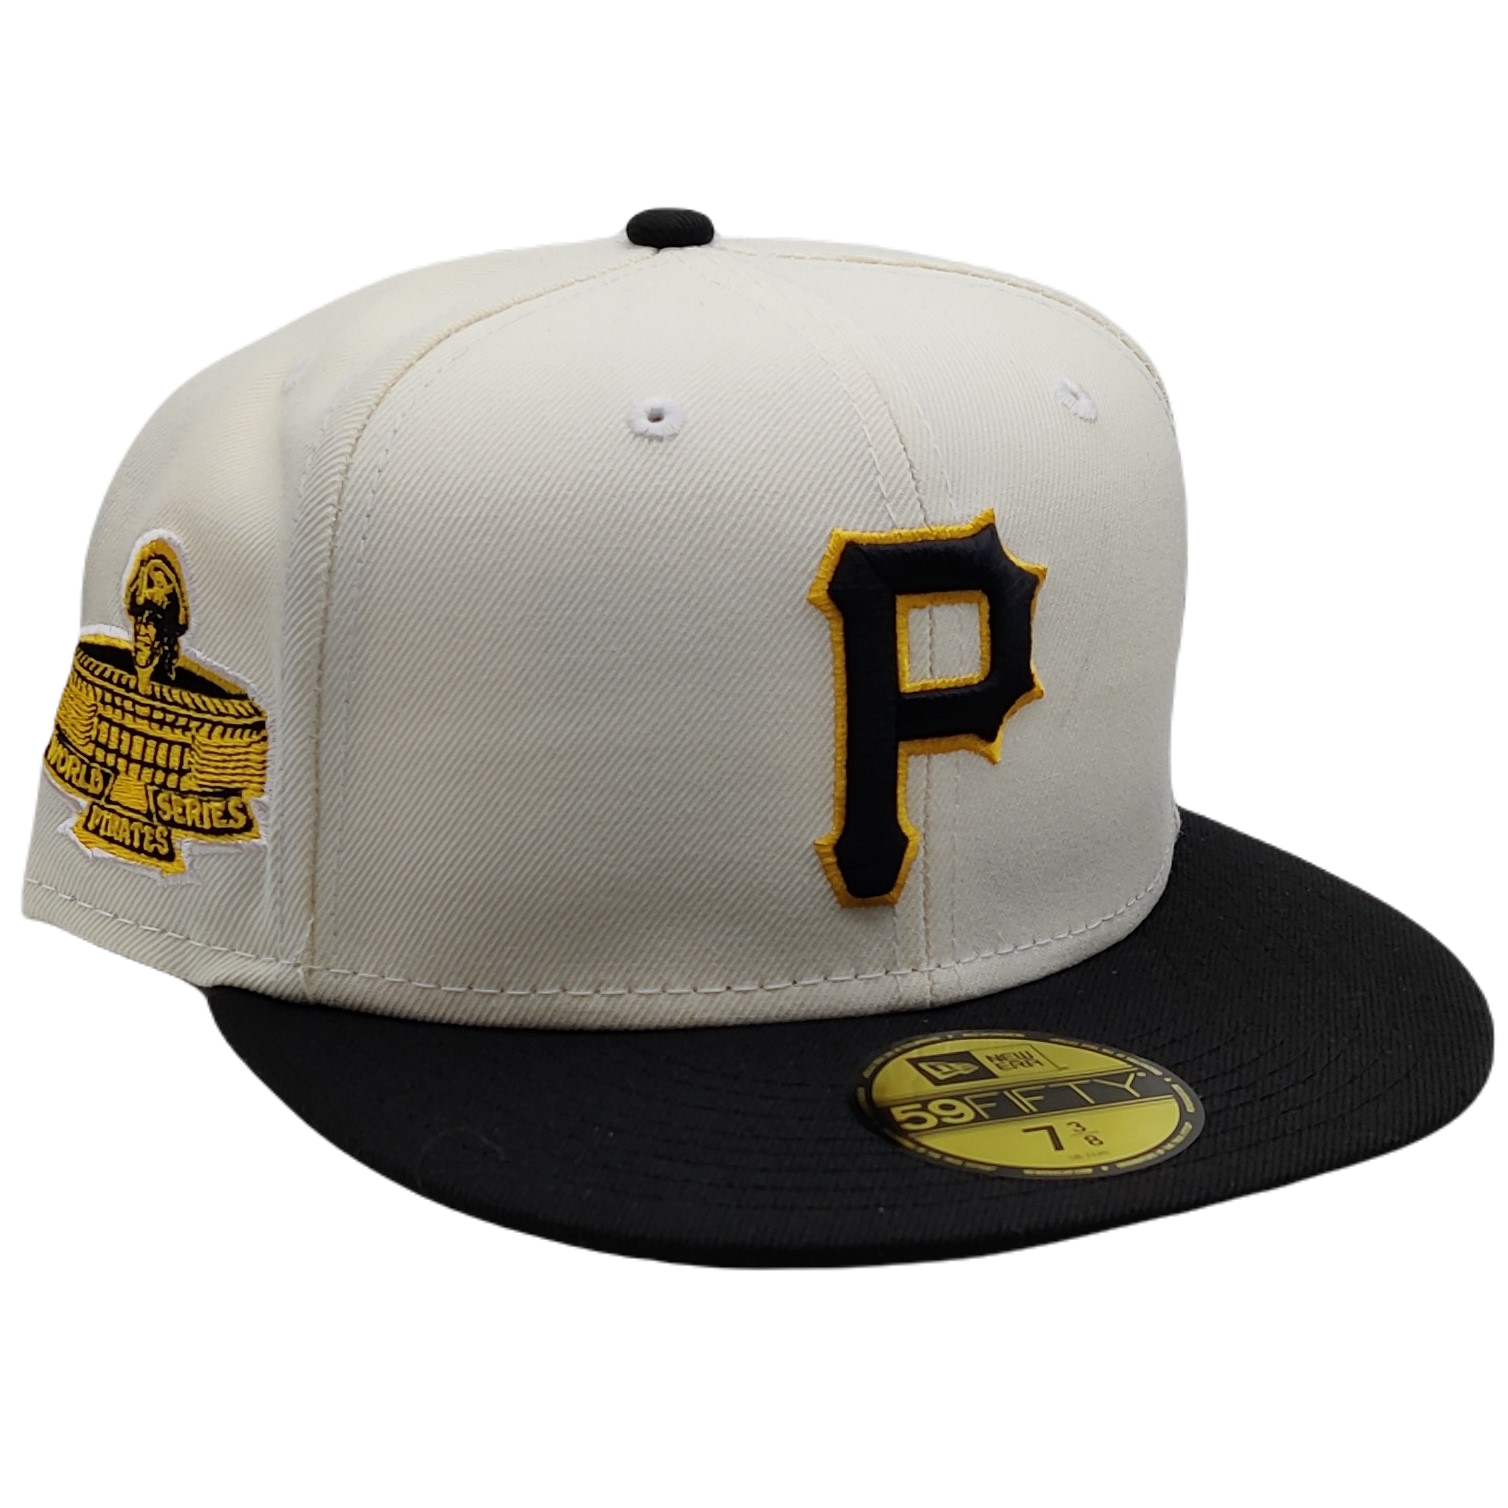 Pittsburgh Pirates 1971 World Series 50th Anniversary Patch – The